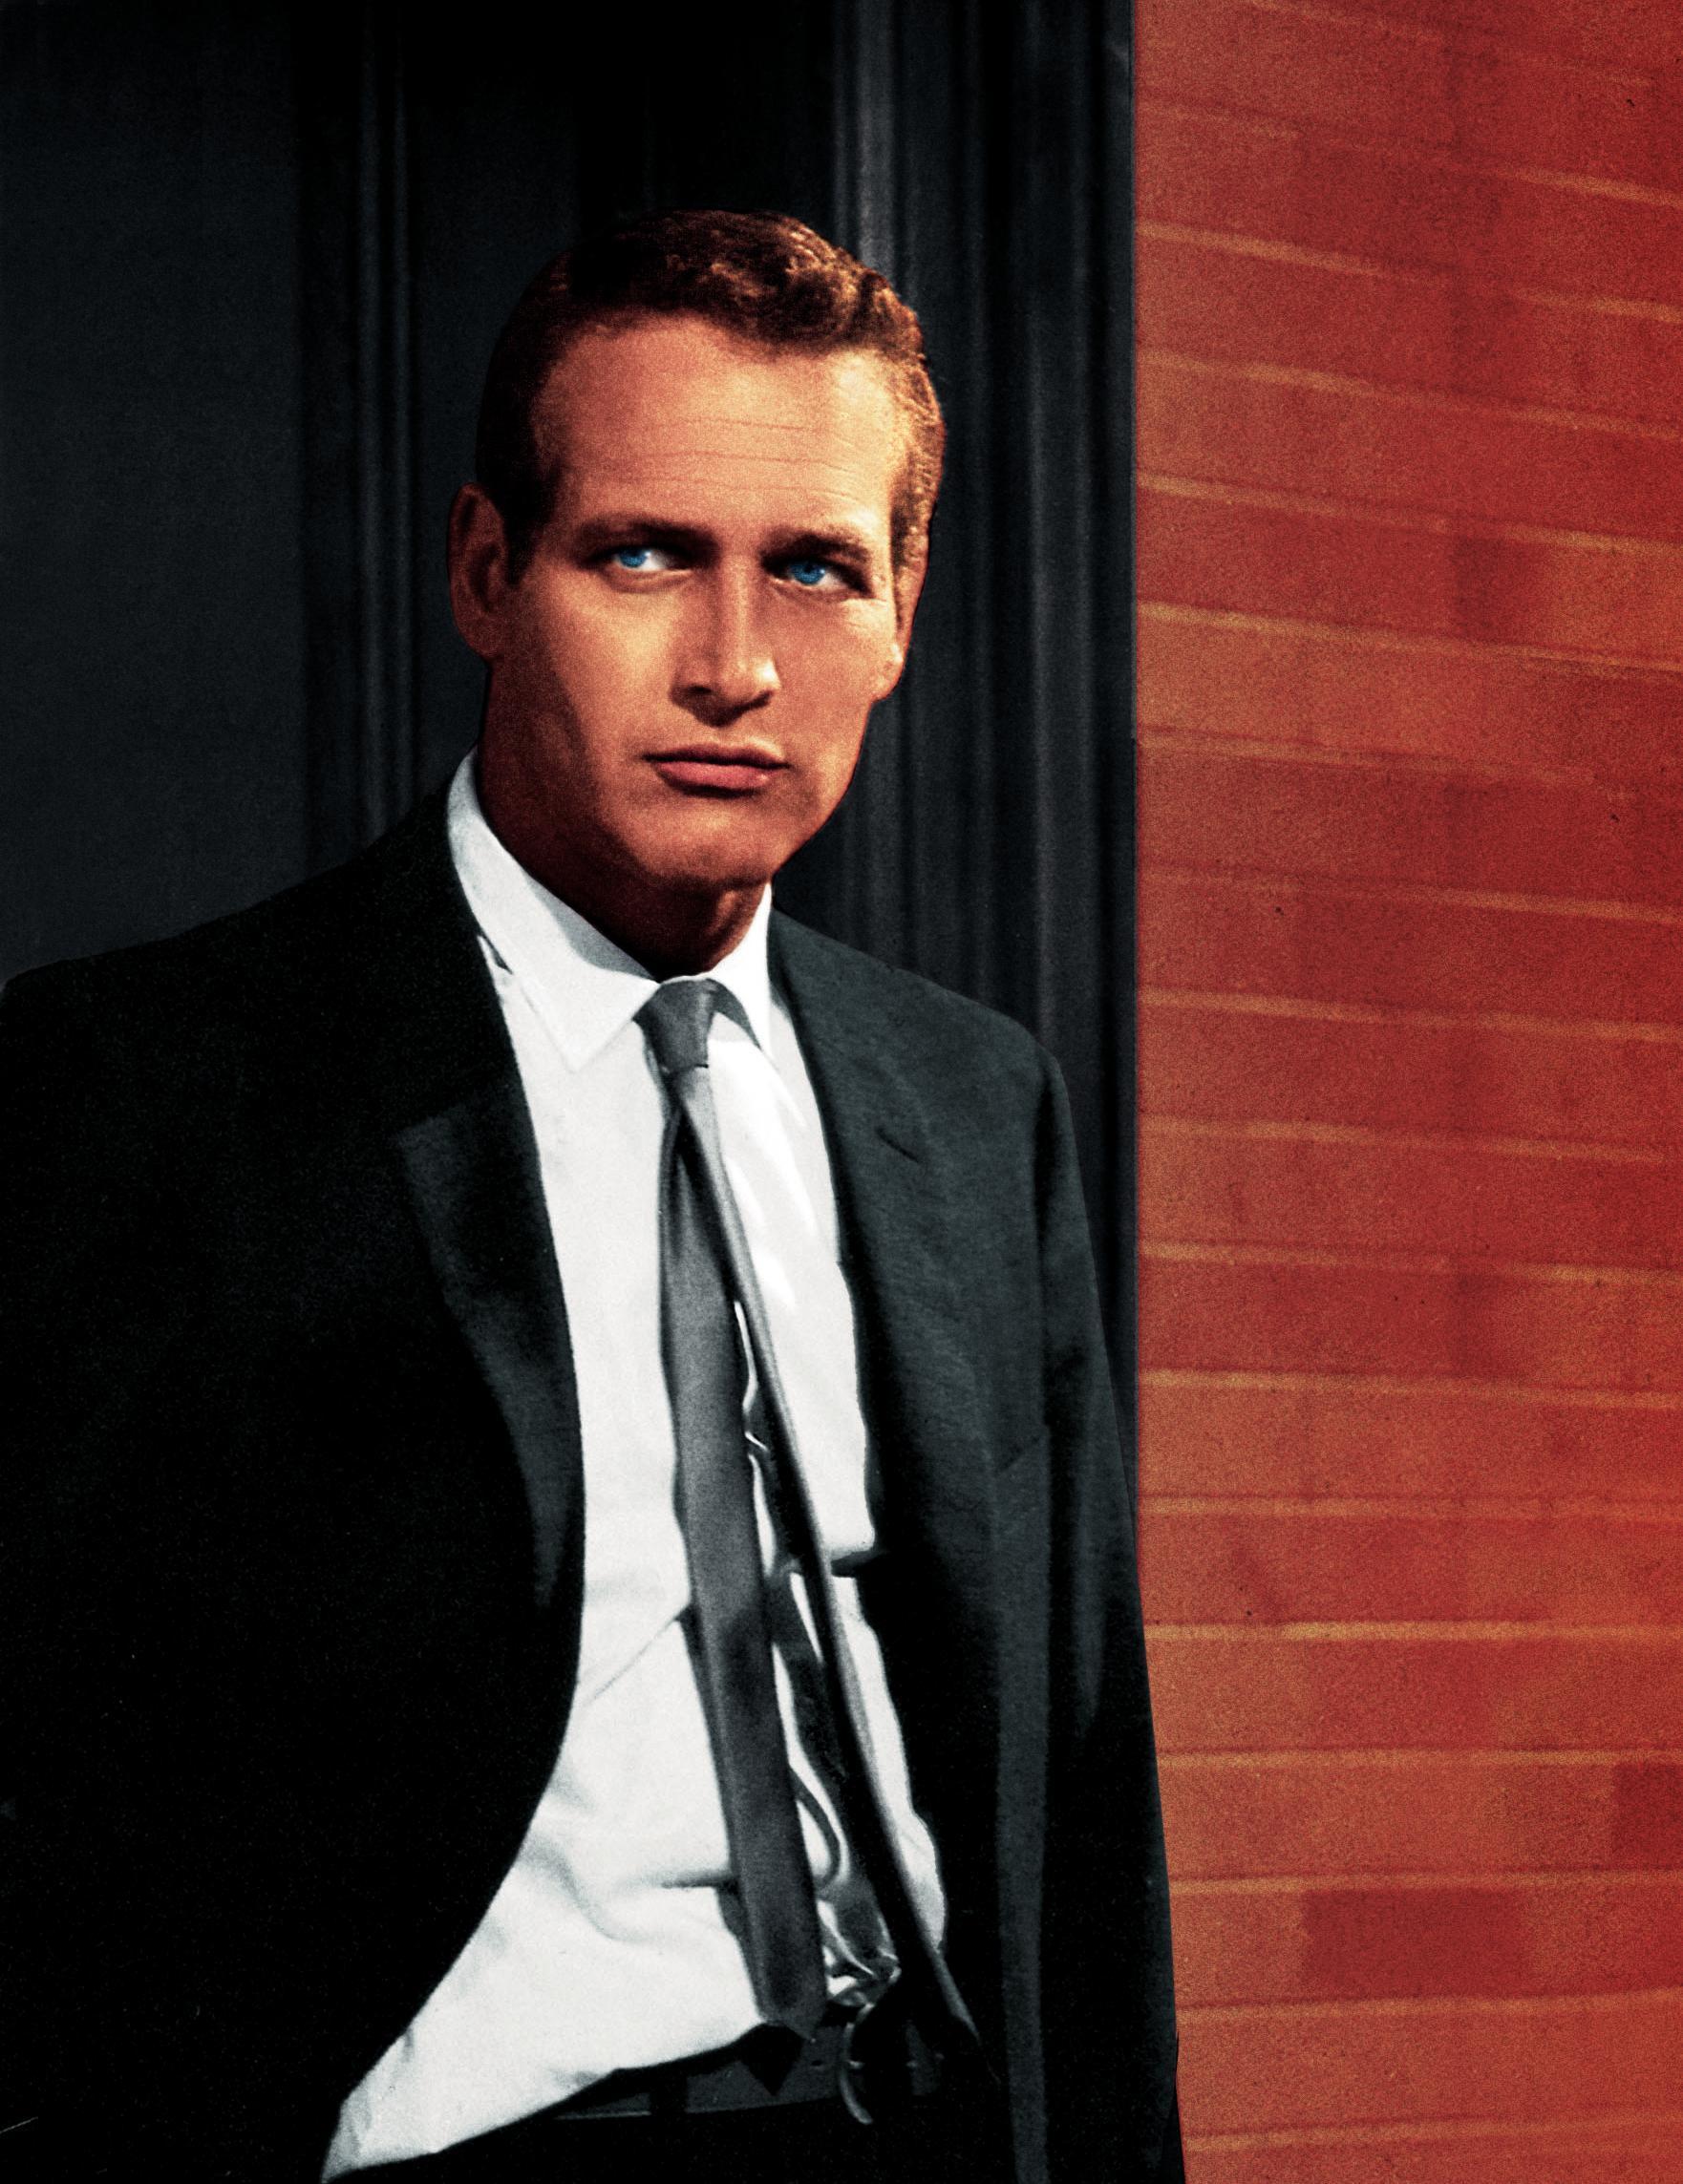 Paul Newman! I can stare into those baby blue eyes all day. He was